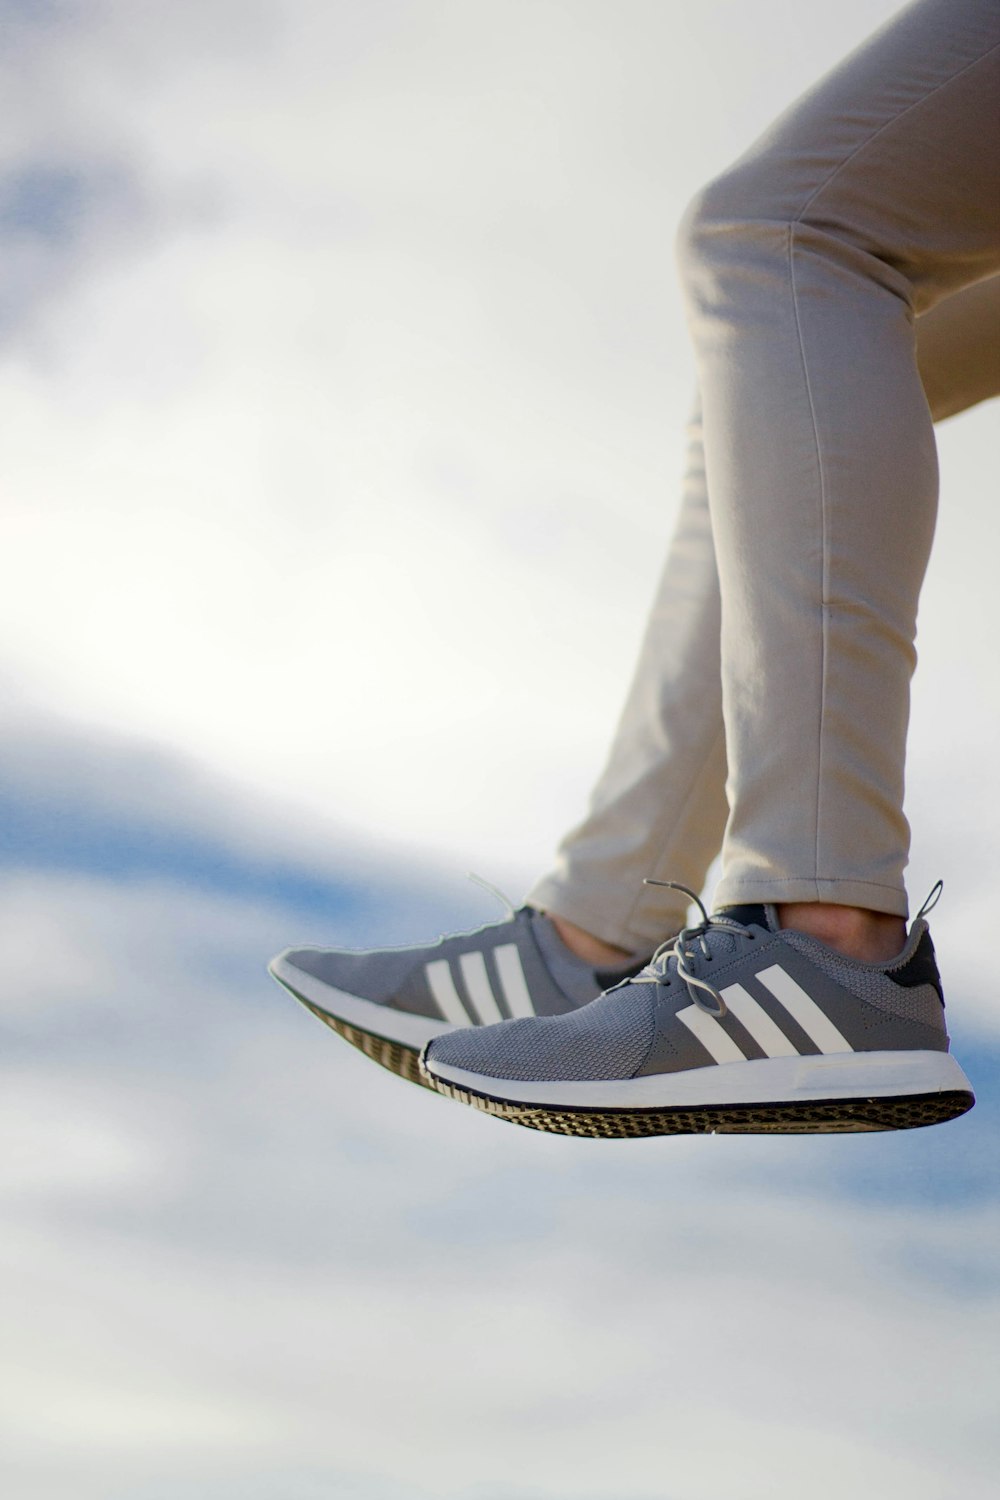 person wearing gray adidas low-top sneakers